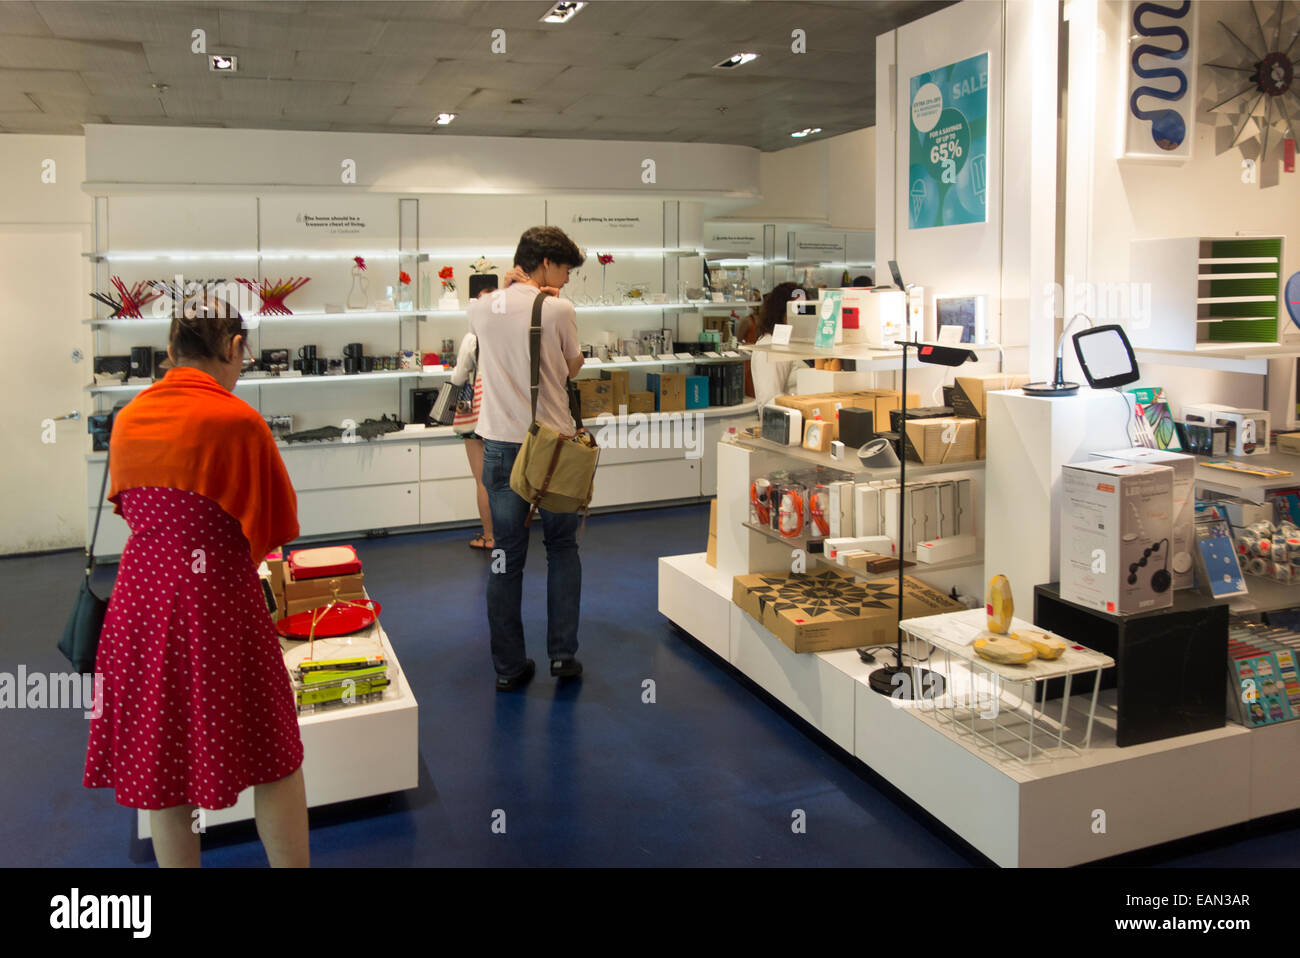 Moma Gift Shop Resolution Photography and Images - Alamy